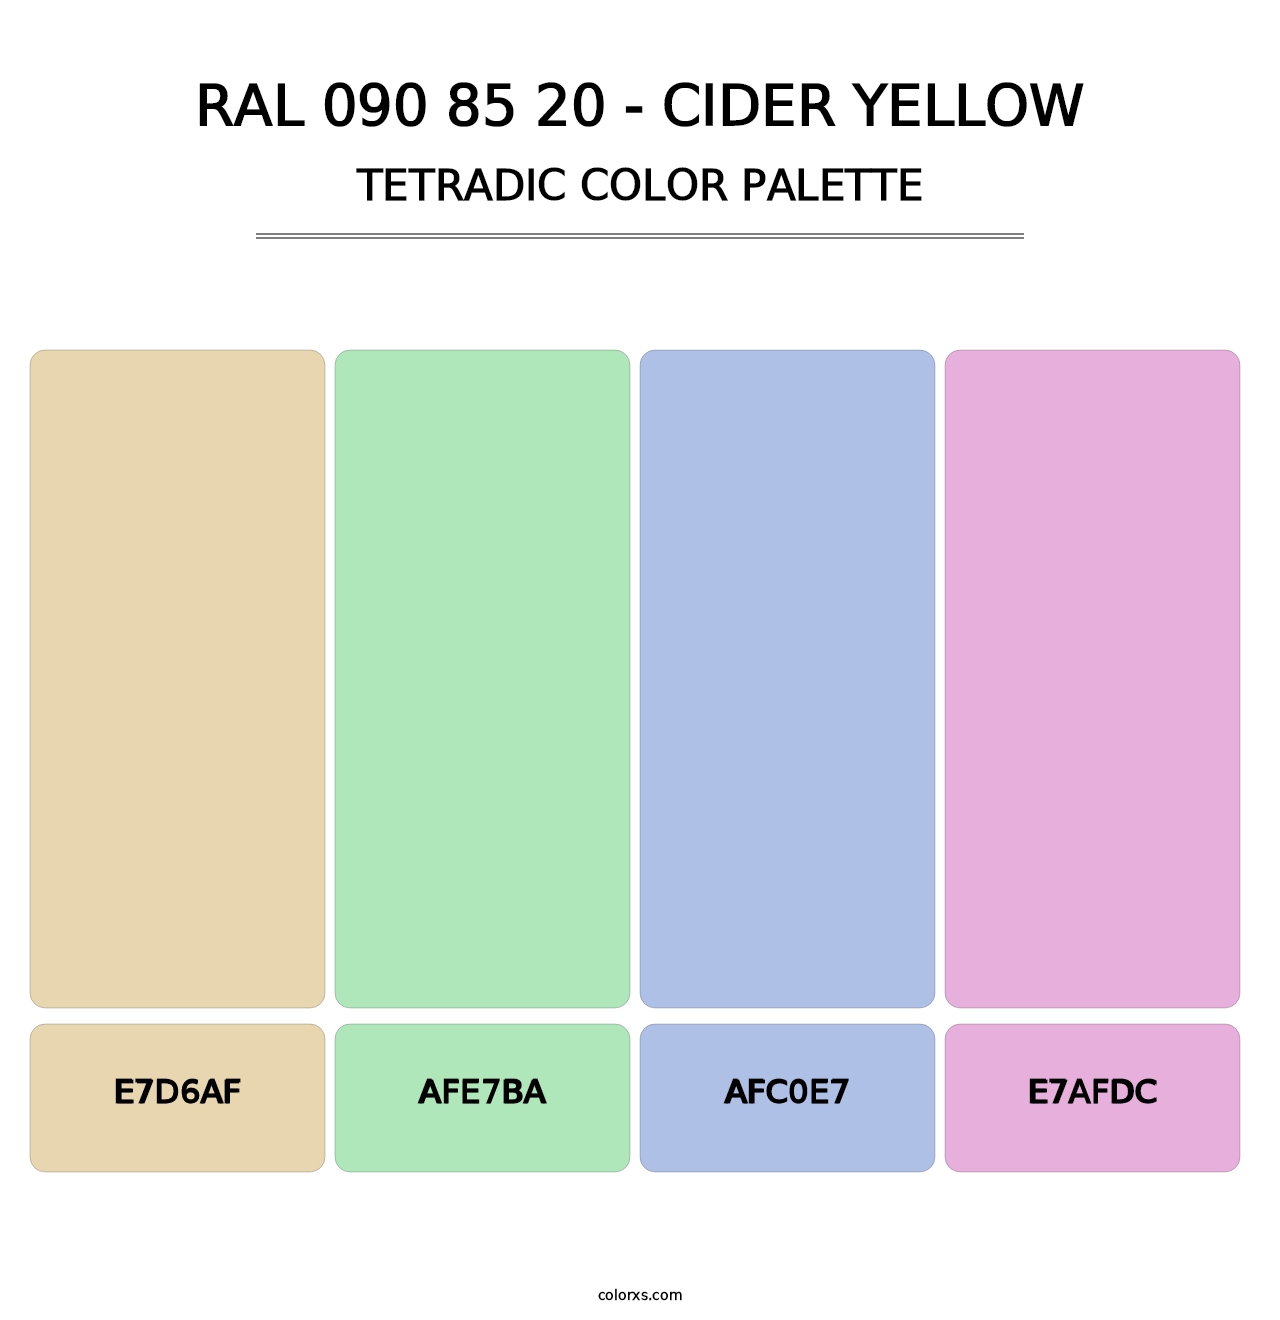 RAL 090 85 20 - Cider Yellow - Tetradic Color Palette